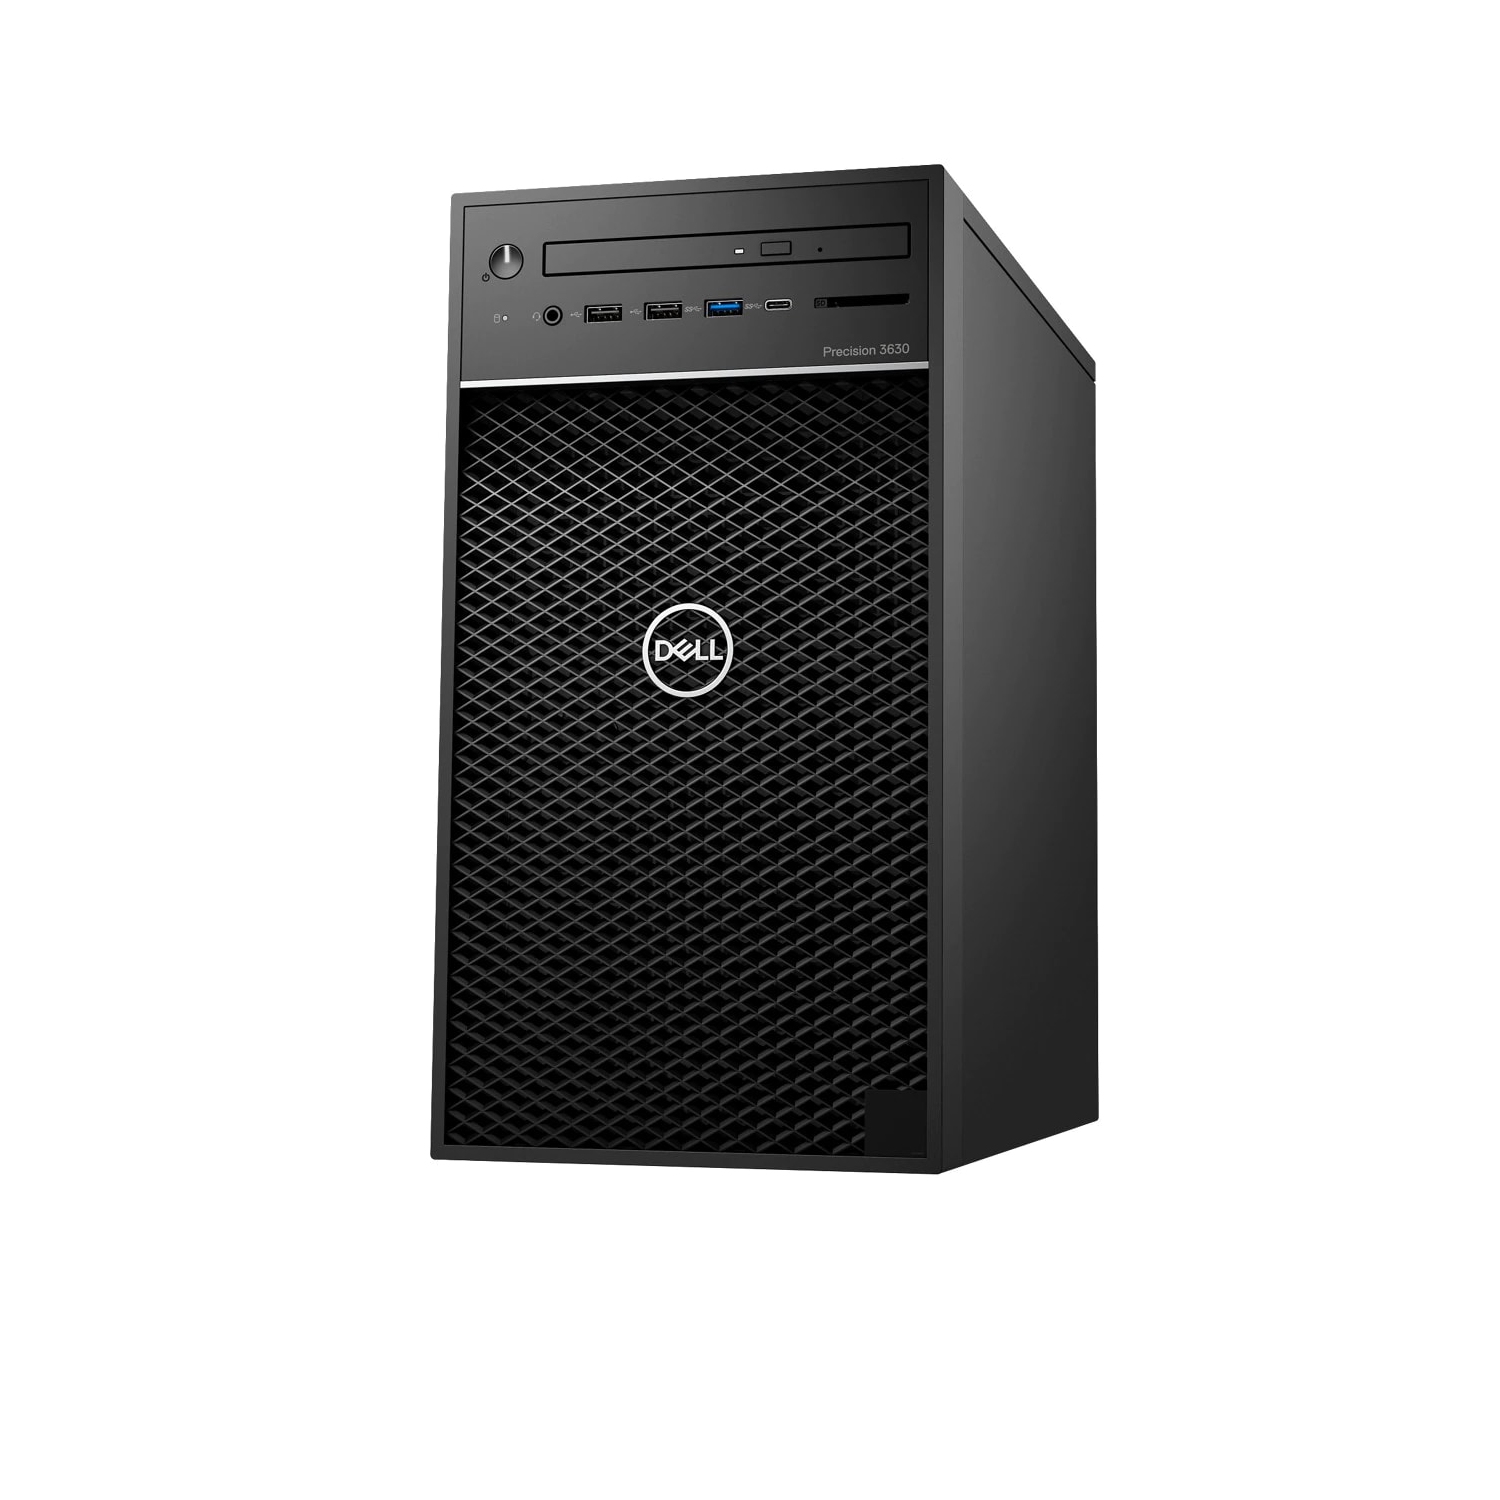 Refurbished (Excellent) - Dell Precision T3630 Workstation Desktop (2017) | Core i7 - 1TB SSD - 64GB RAM - RTX 4000 | 6 Cores @ 4.7 GHz Certified Refurbished